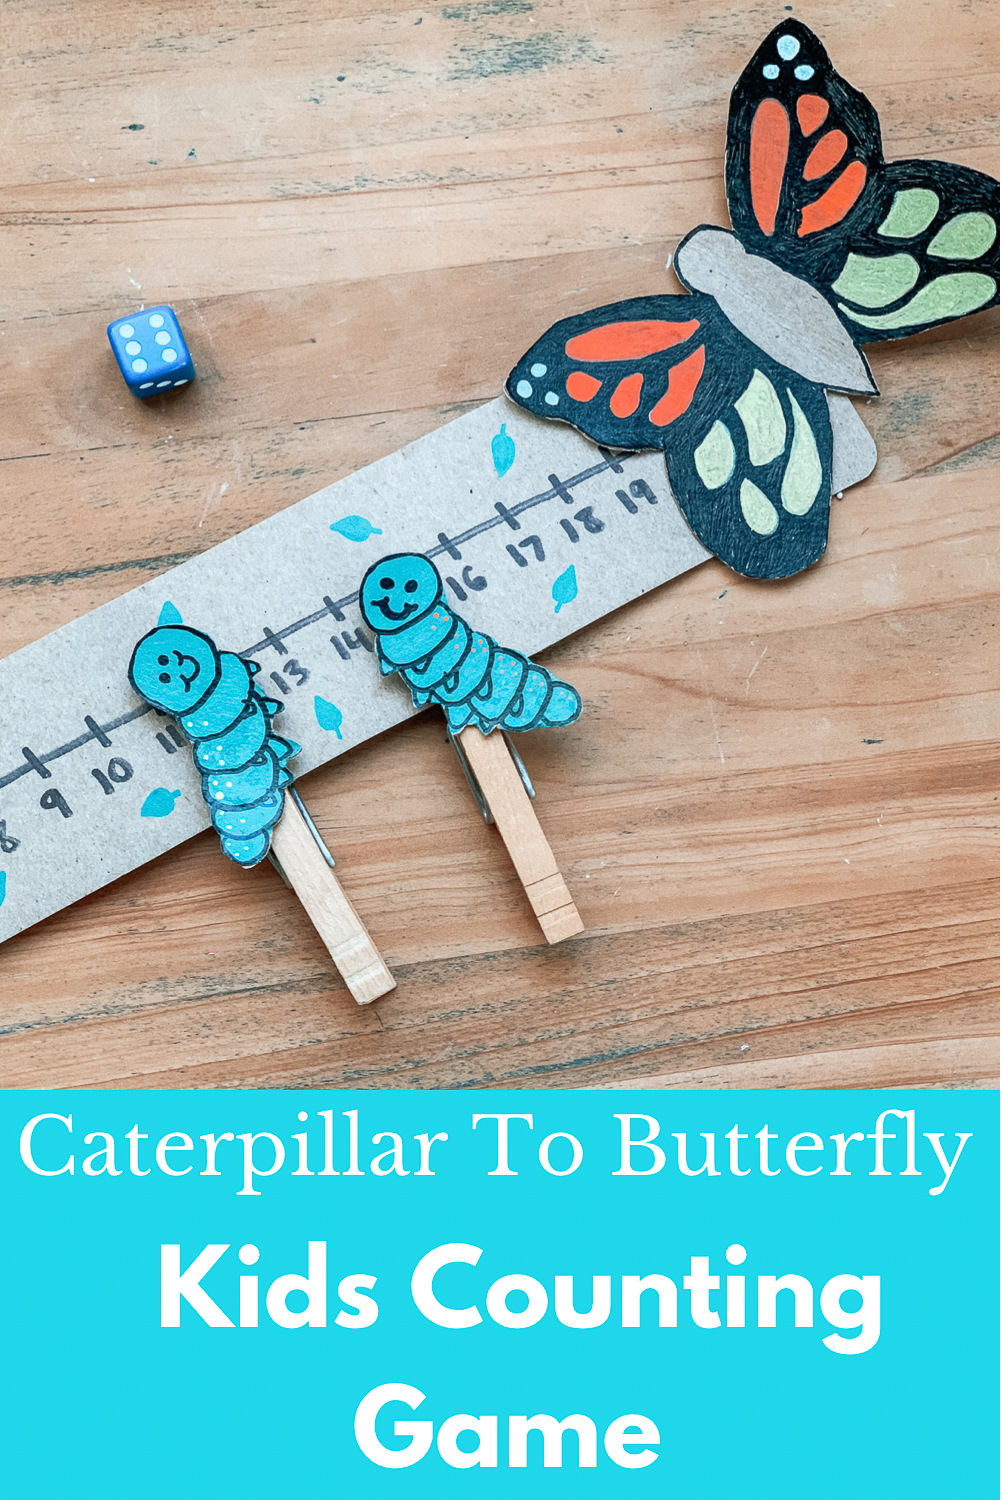 Caterpillar To Butterfly Kids Counting Game